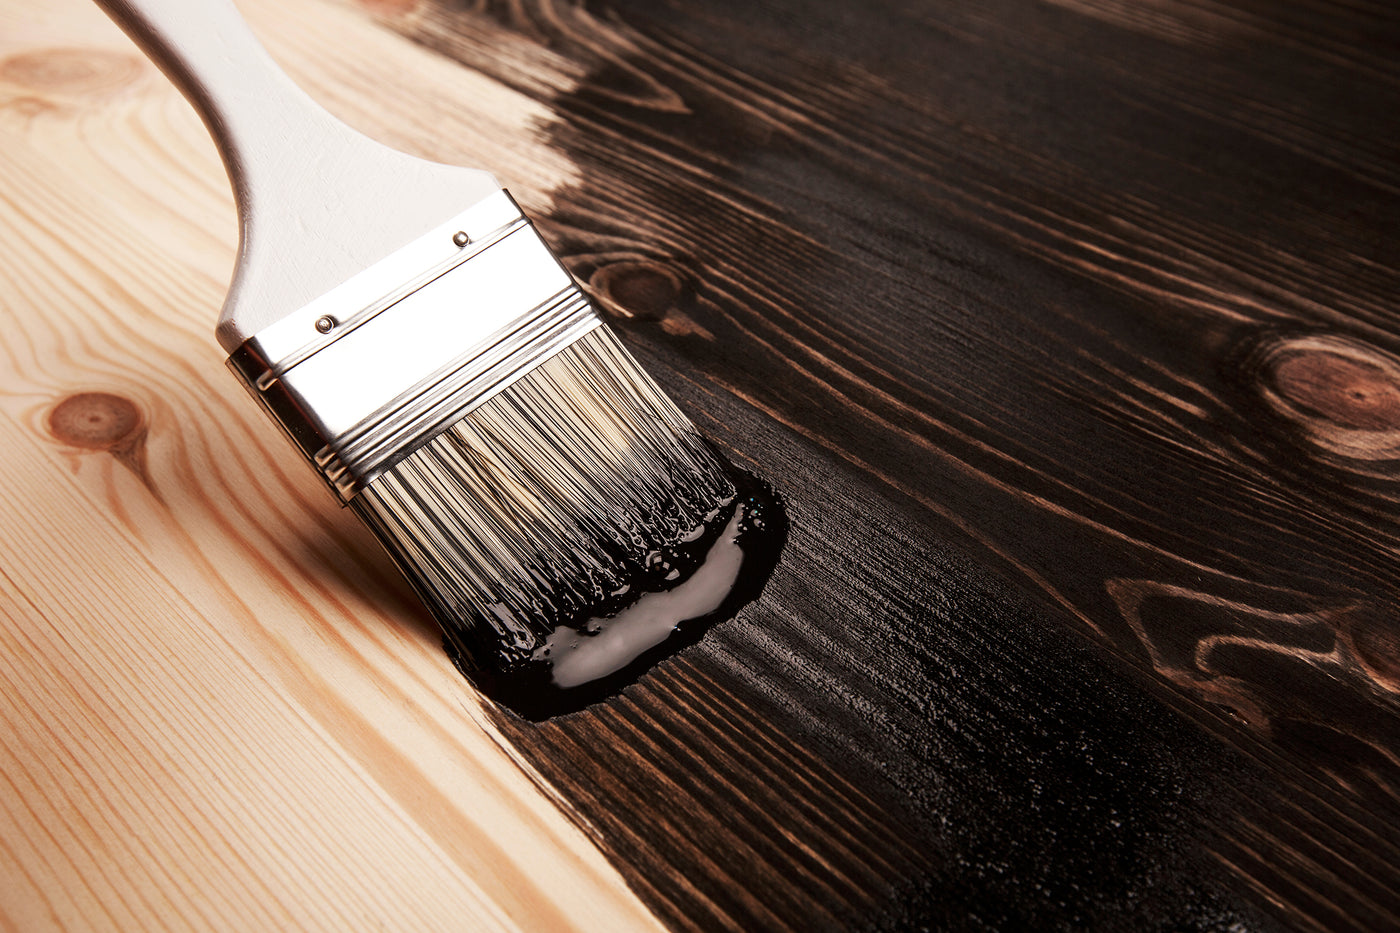 LIVOS: OILS THAT PENETRATE WOOD SURFACES NATURALLY